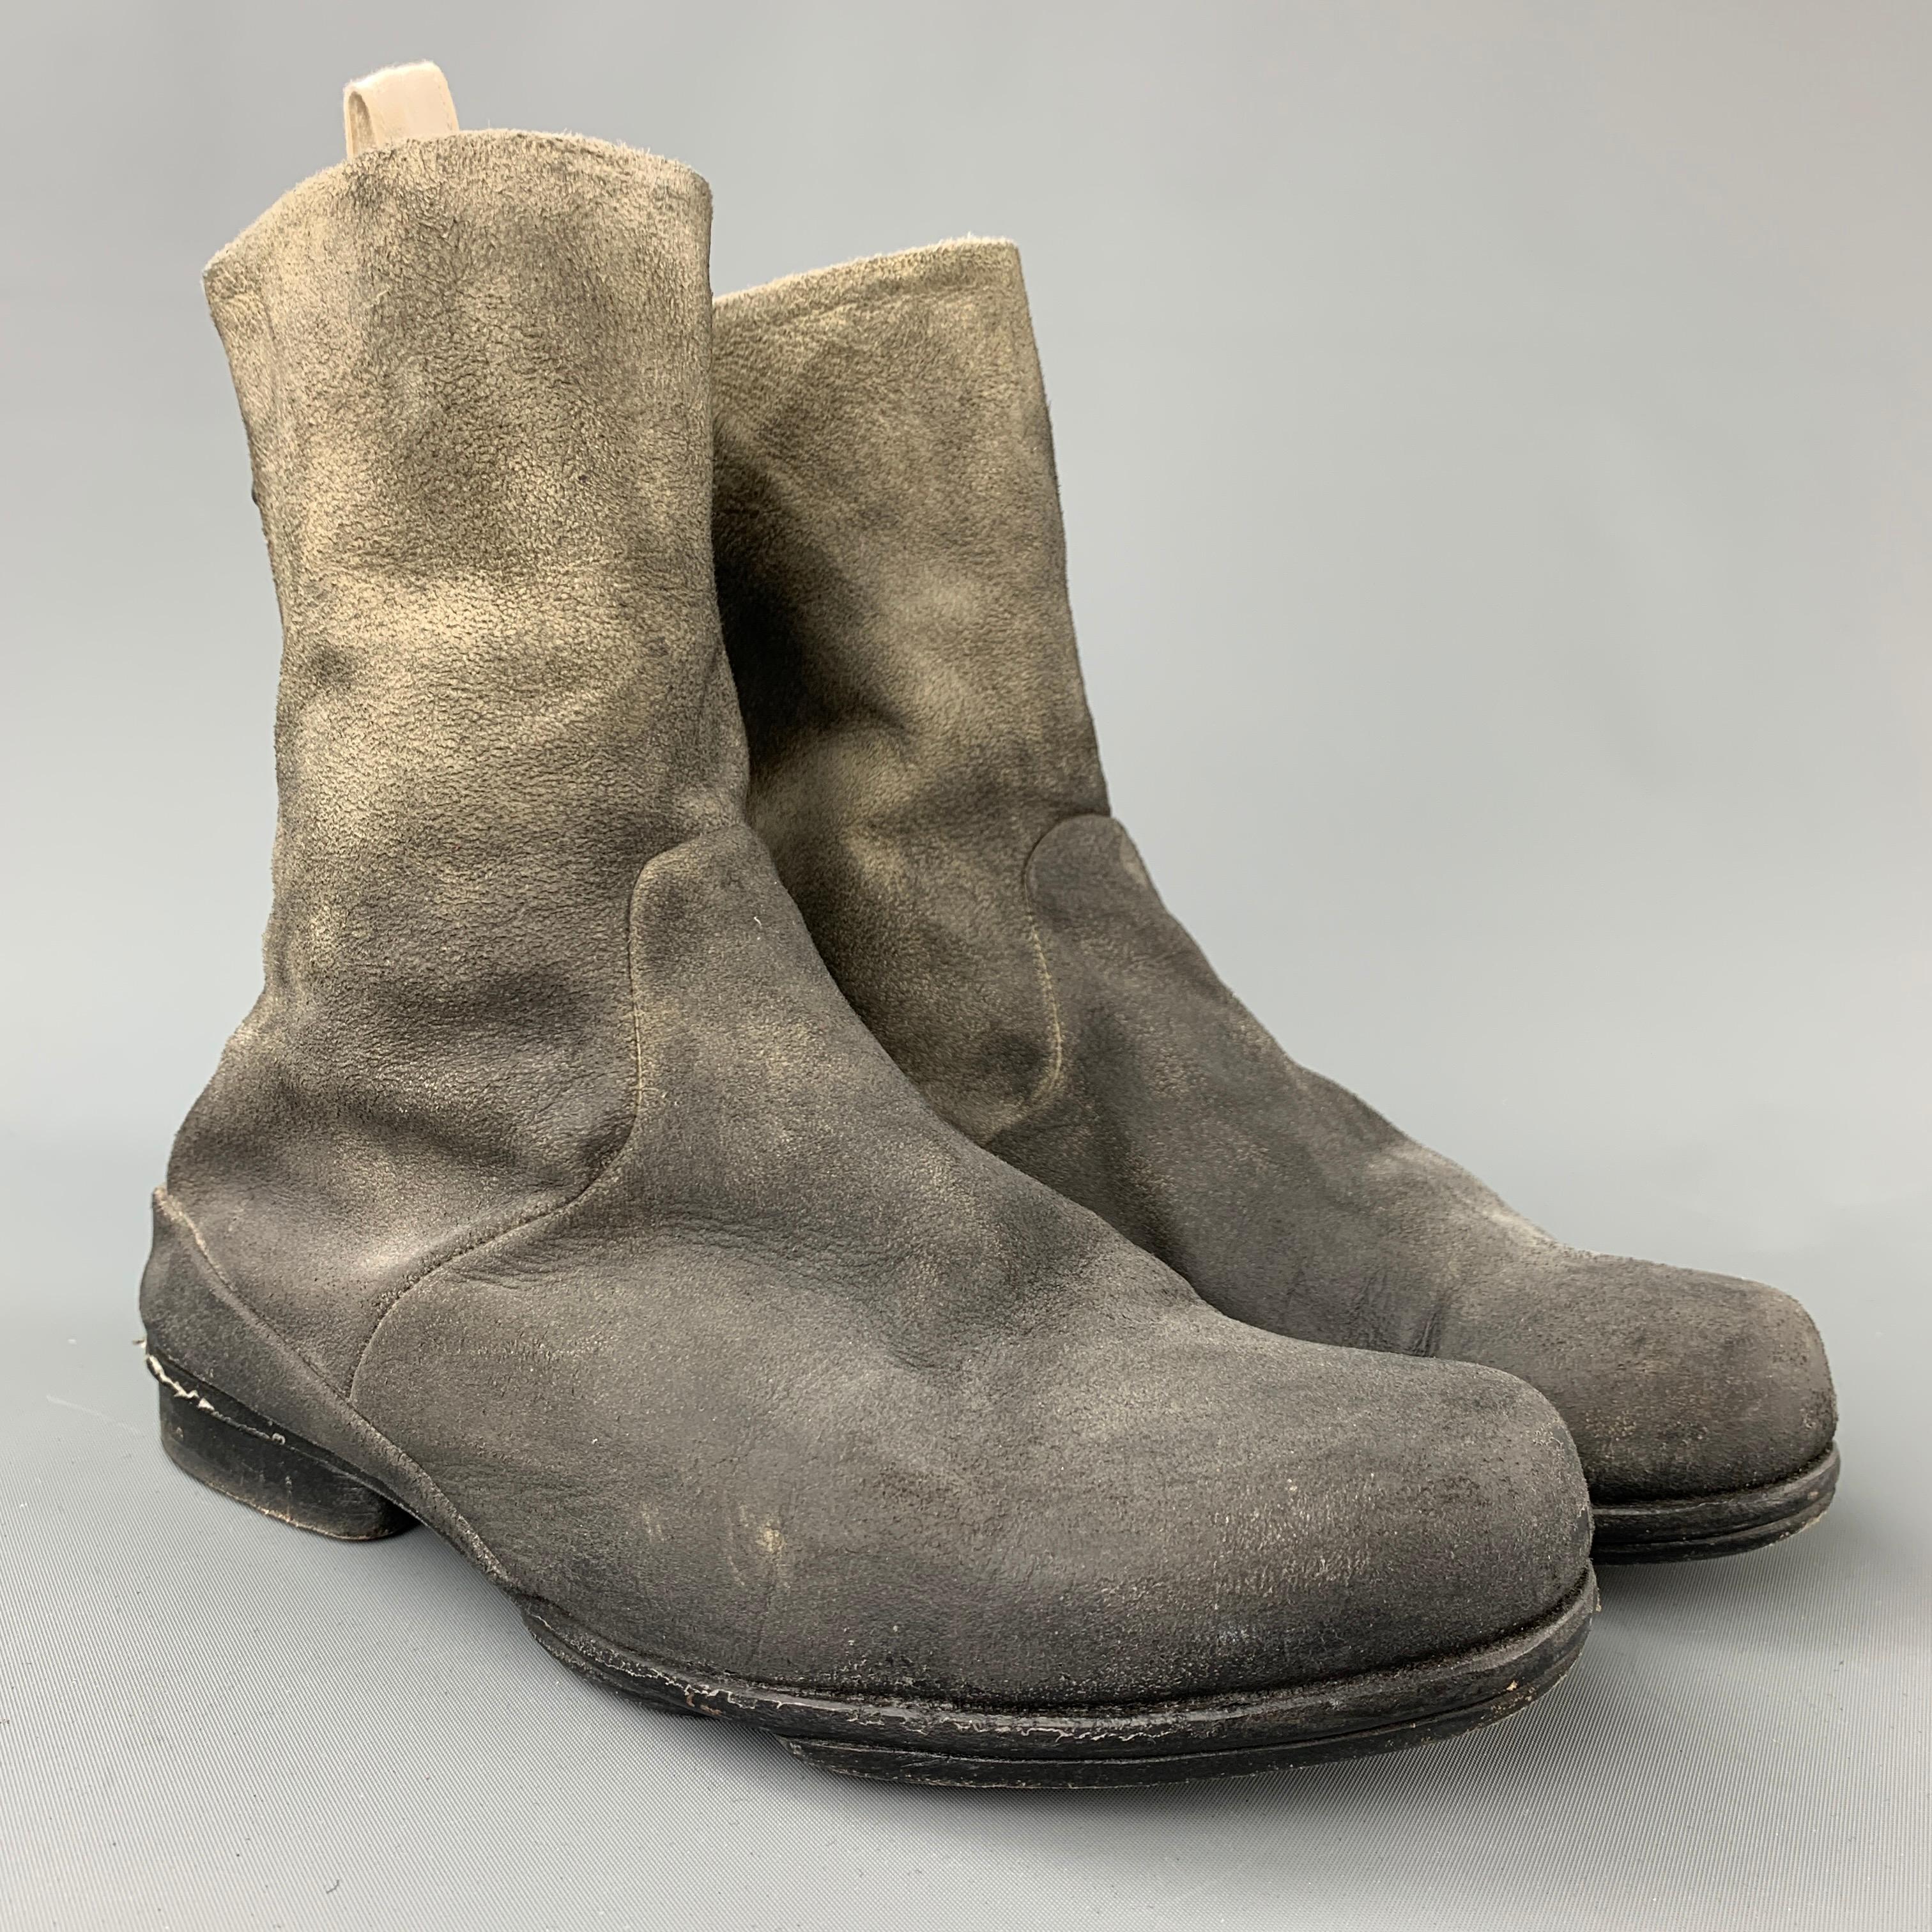 VOLGA VOLGA ankle boots comes in a grey distressed leather featuring a round toe, wooden sole, and a back zip up closure. Made in Tokyo.

Good Pre-Owned Condition.
Marked: 23.5
Original Retail Price: $995.00

Measurements:

Length: 9.5 in.
Width: 3